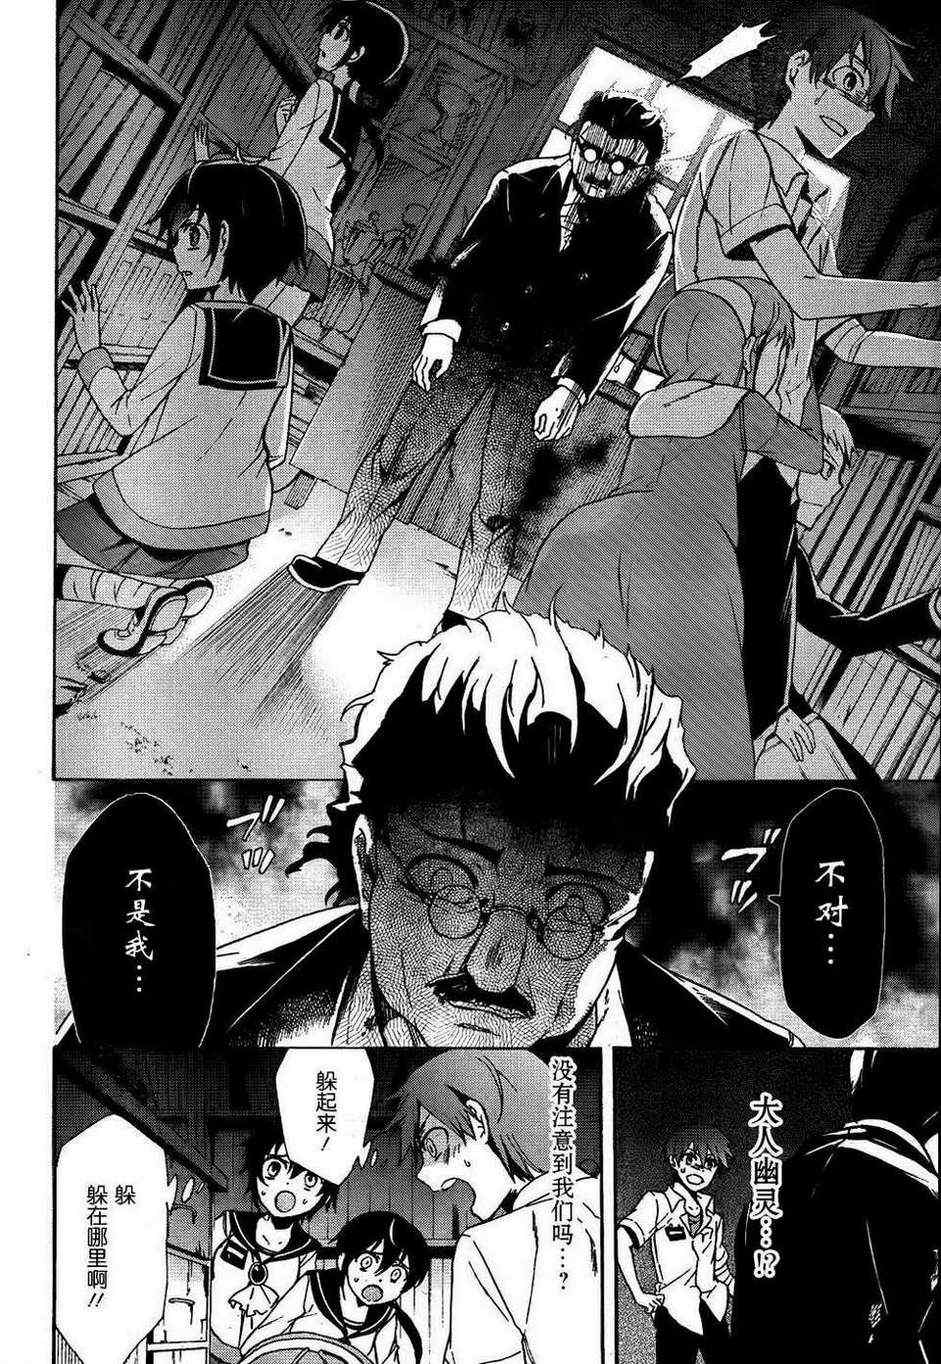 BLOOD_COVERED - 第39話 - 4